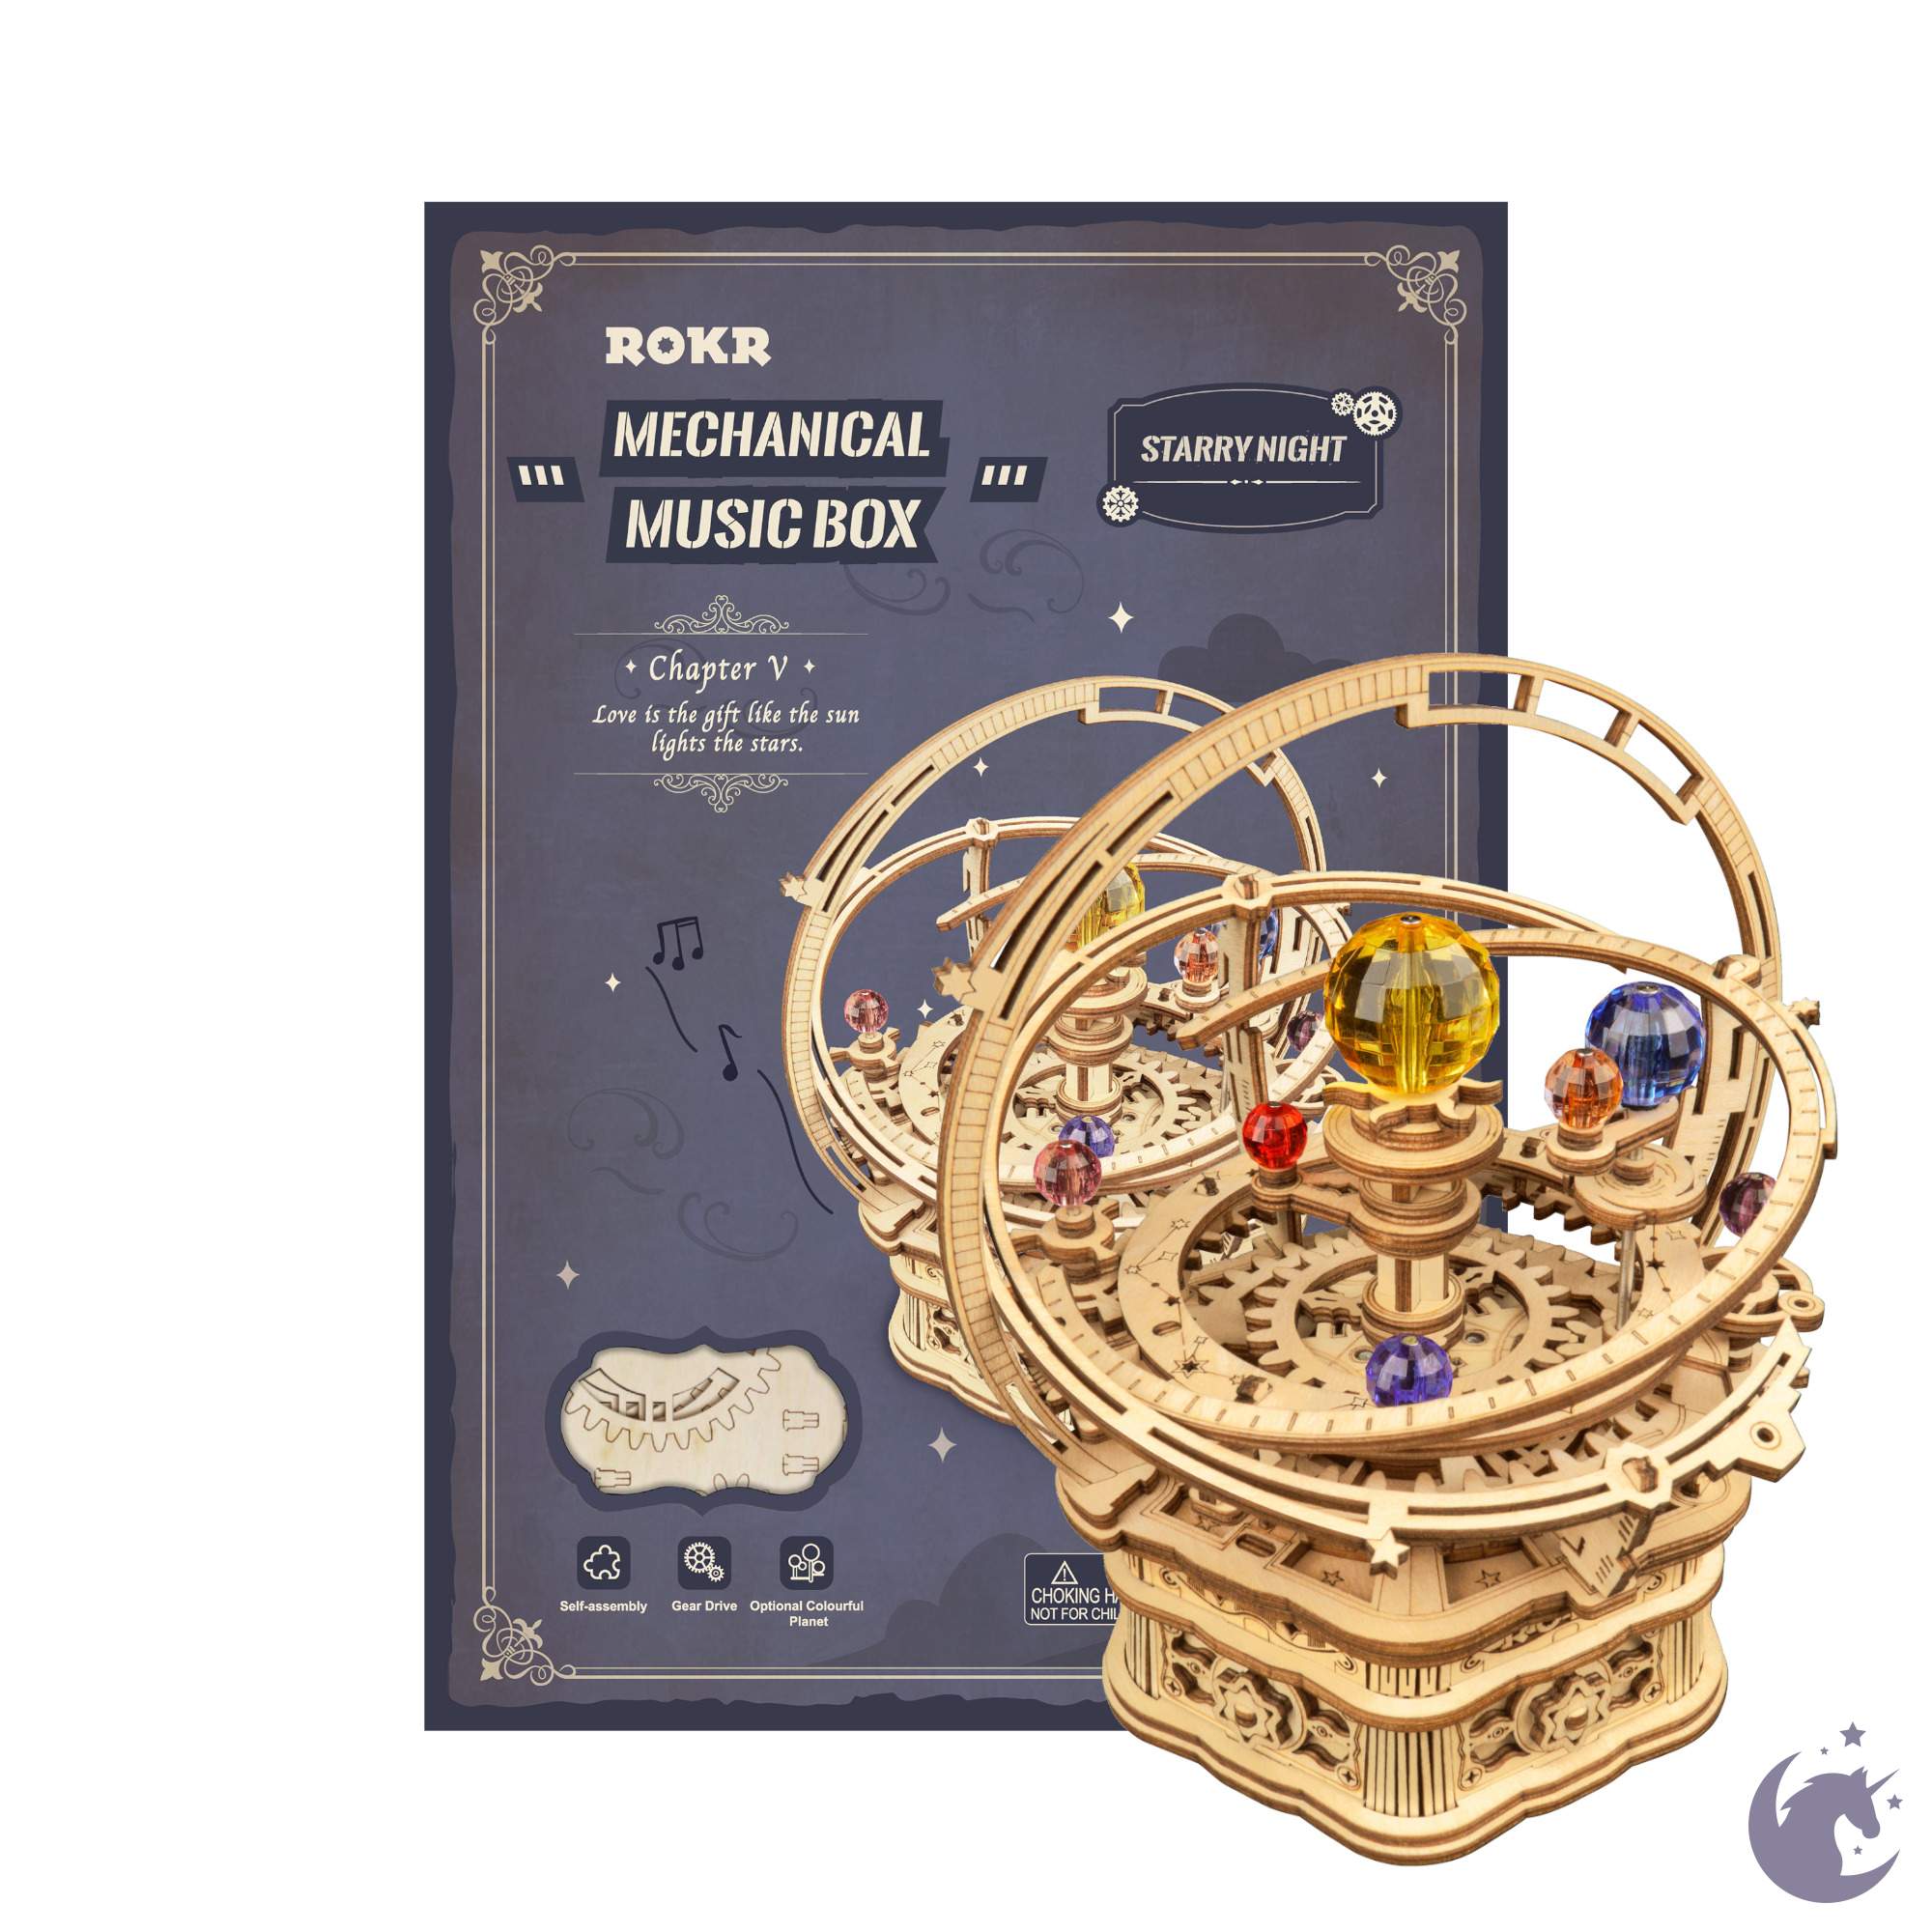 unicorntoys_robotime_rokr_diy_mechanical_music_box_3D_wooden_puzzle_game_assembly_model_building_kits_engineering_toys_for_Teens_AMK_51_5_129f8a5b-baf2-41d7-91cd-8a5f1274f035.jpg